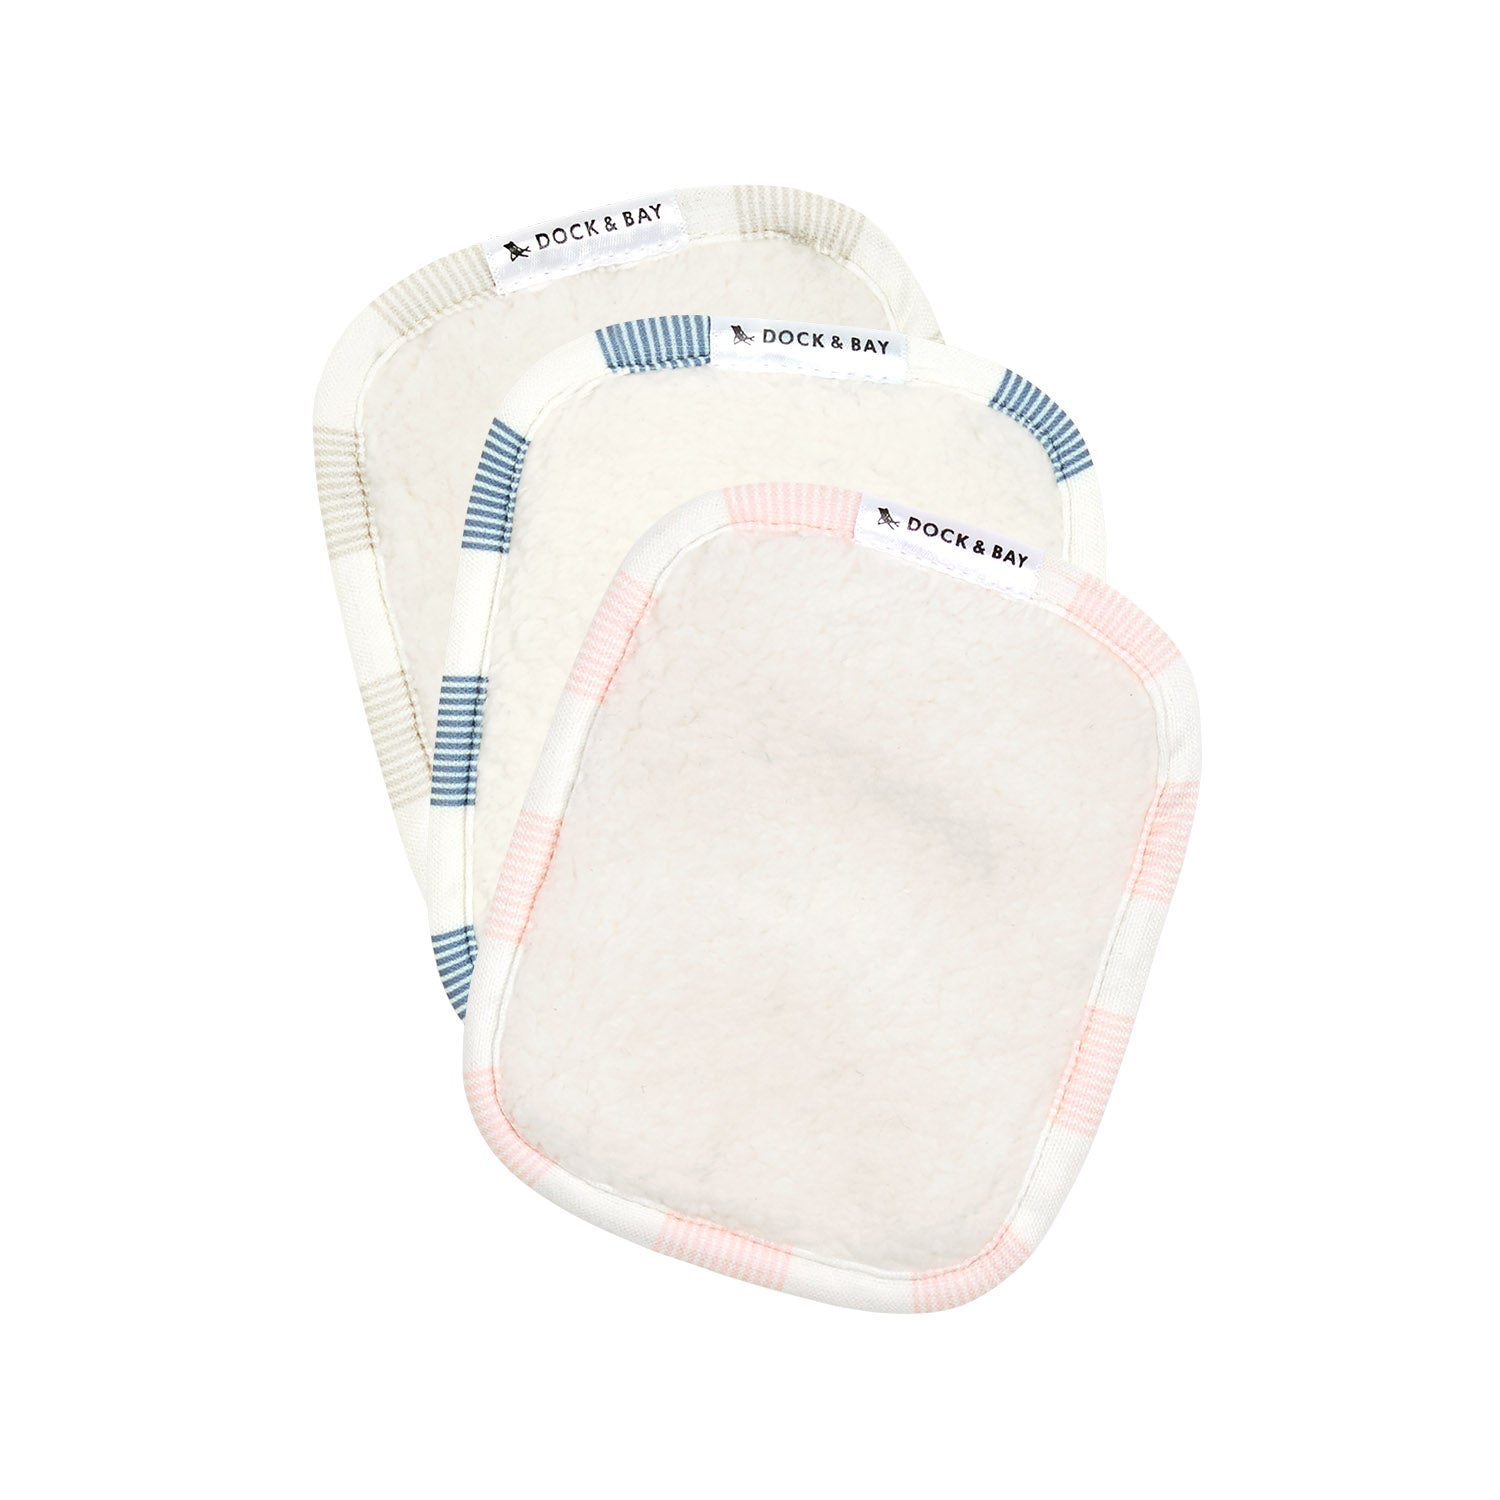 Dock and Bay, Makeup Removers - Cabana 3 Pack